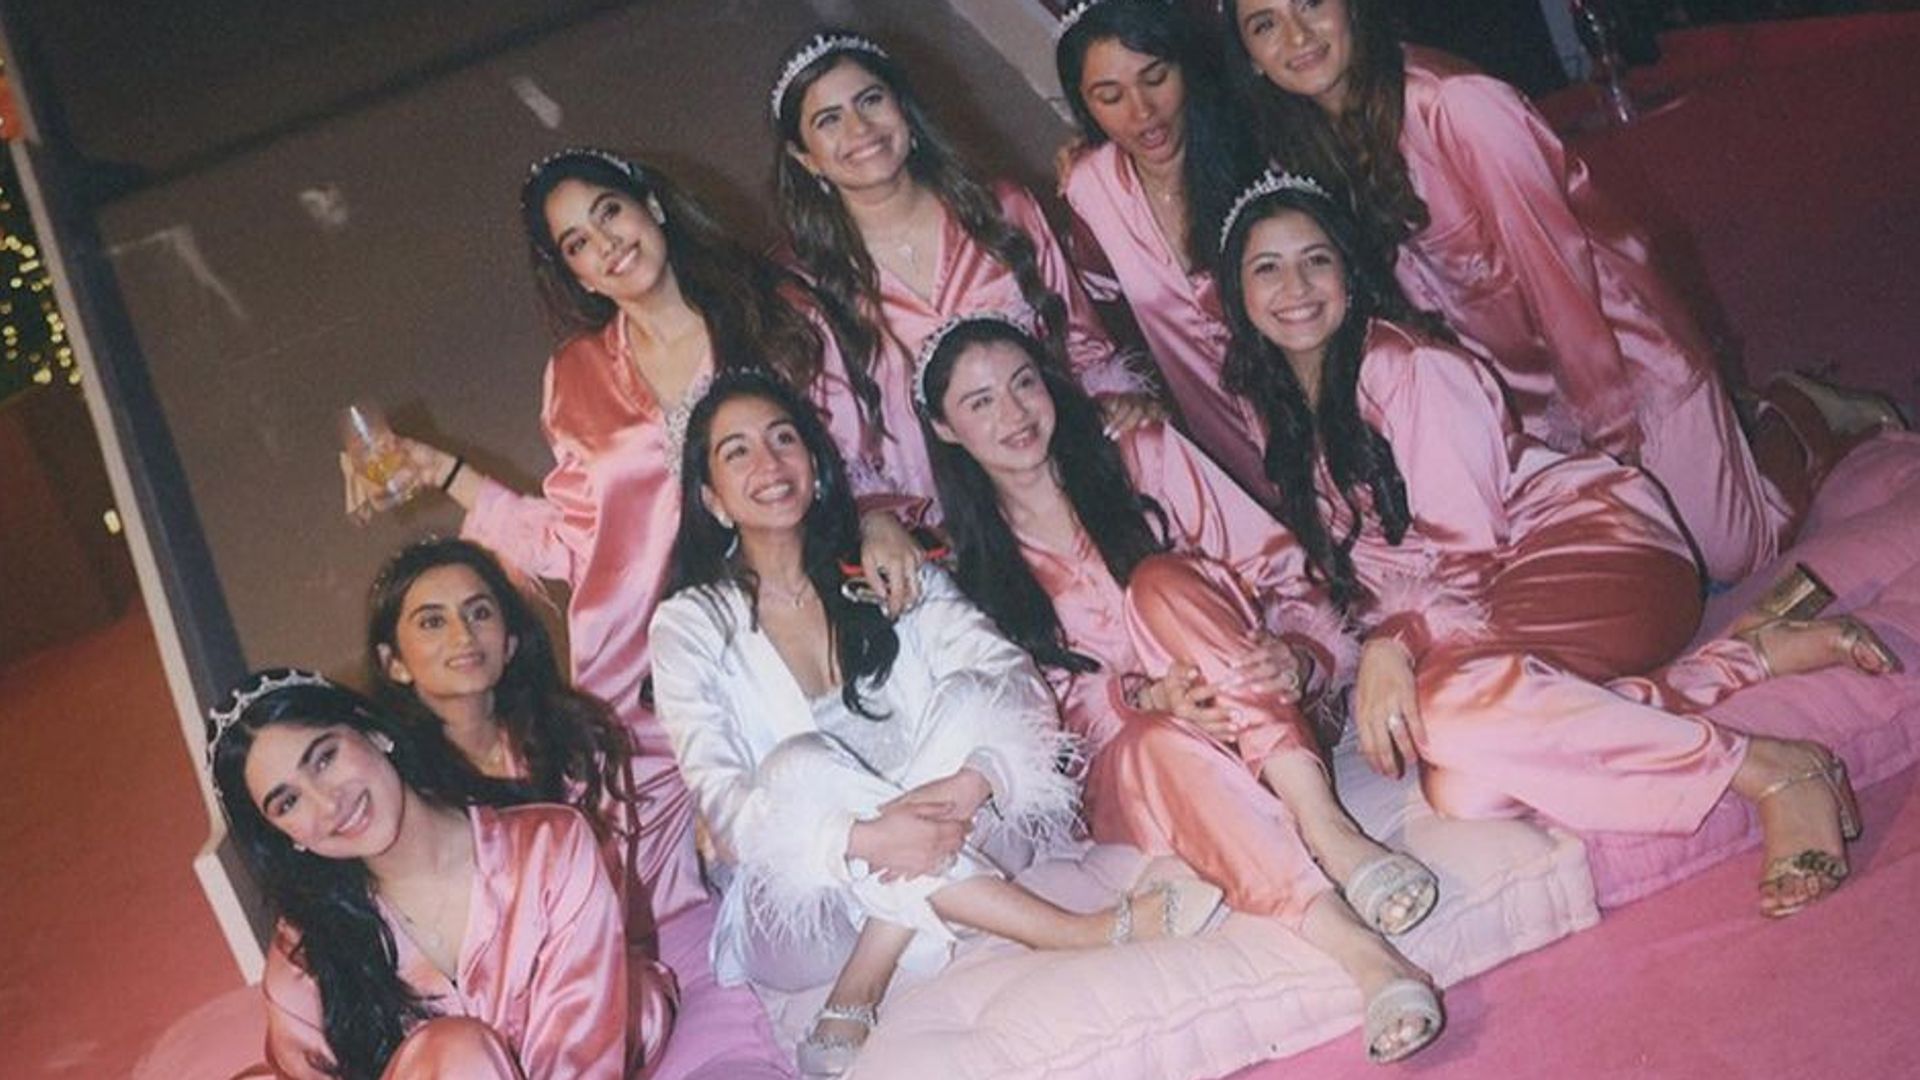 Is this the world's most lavish hen party? Radhika Merchant just hosted a 'Princess Diaries' themed bridal shower